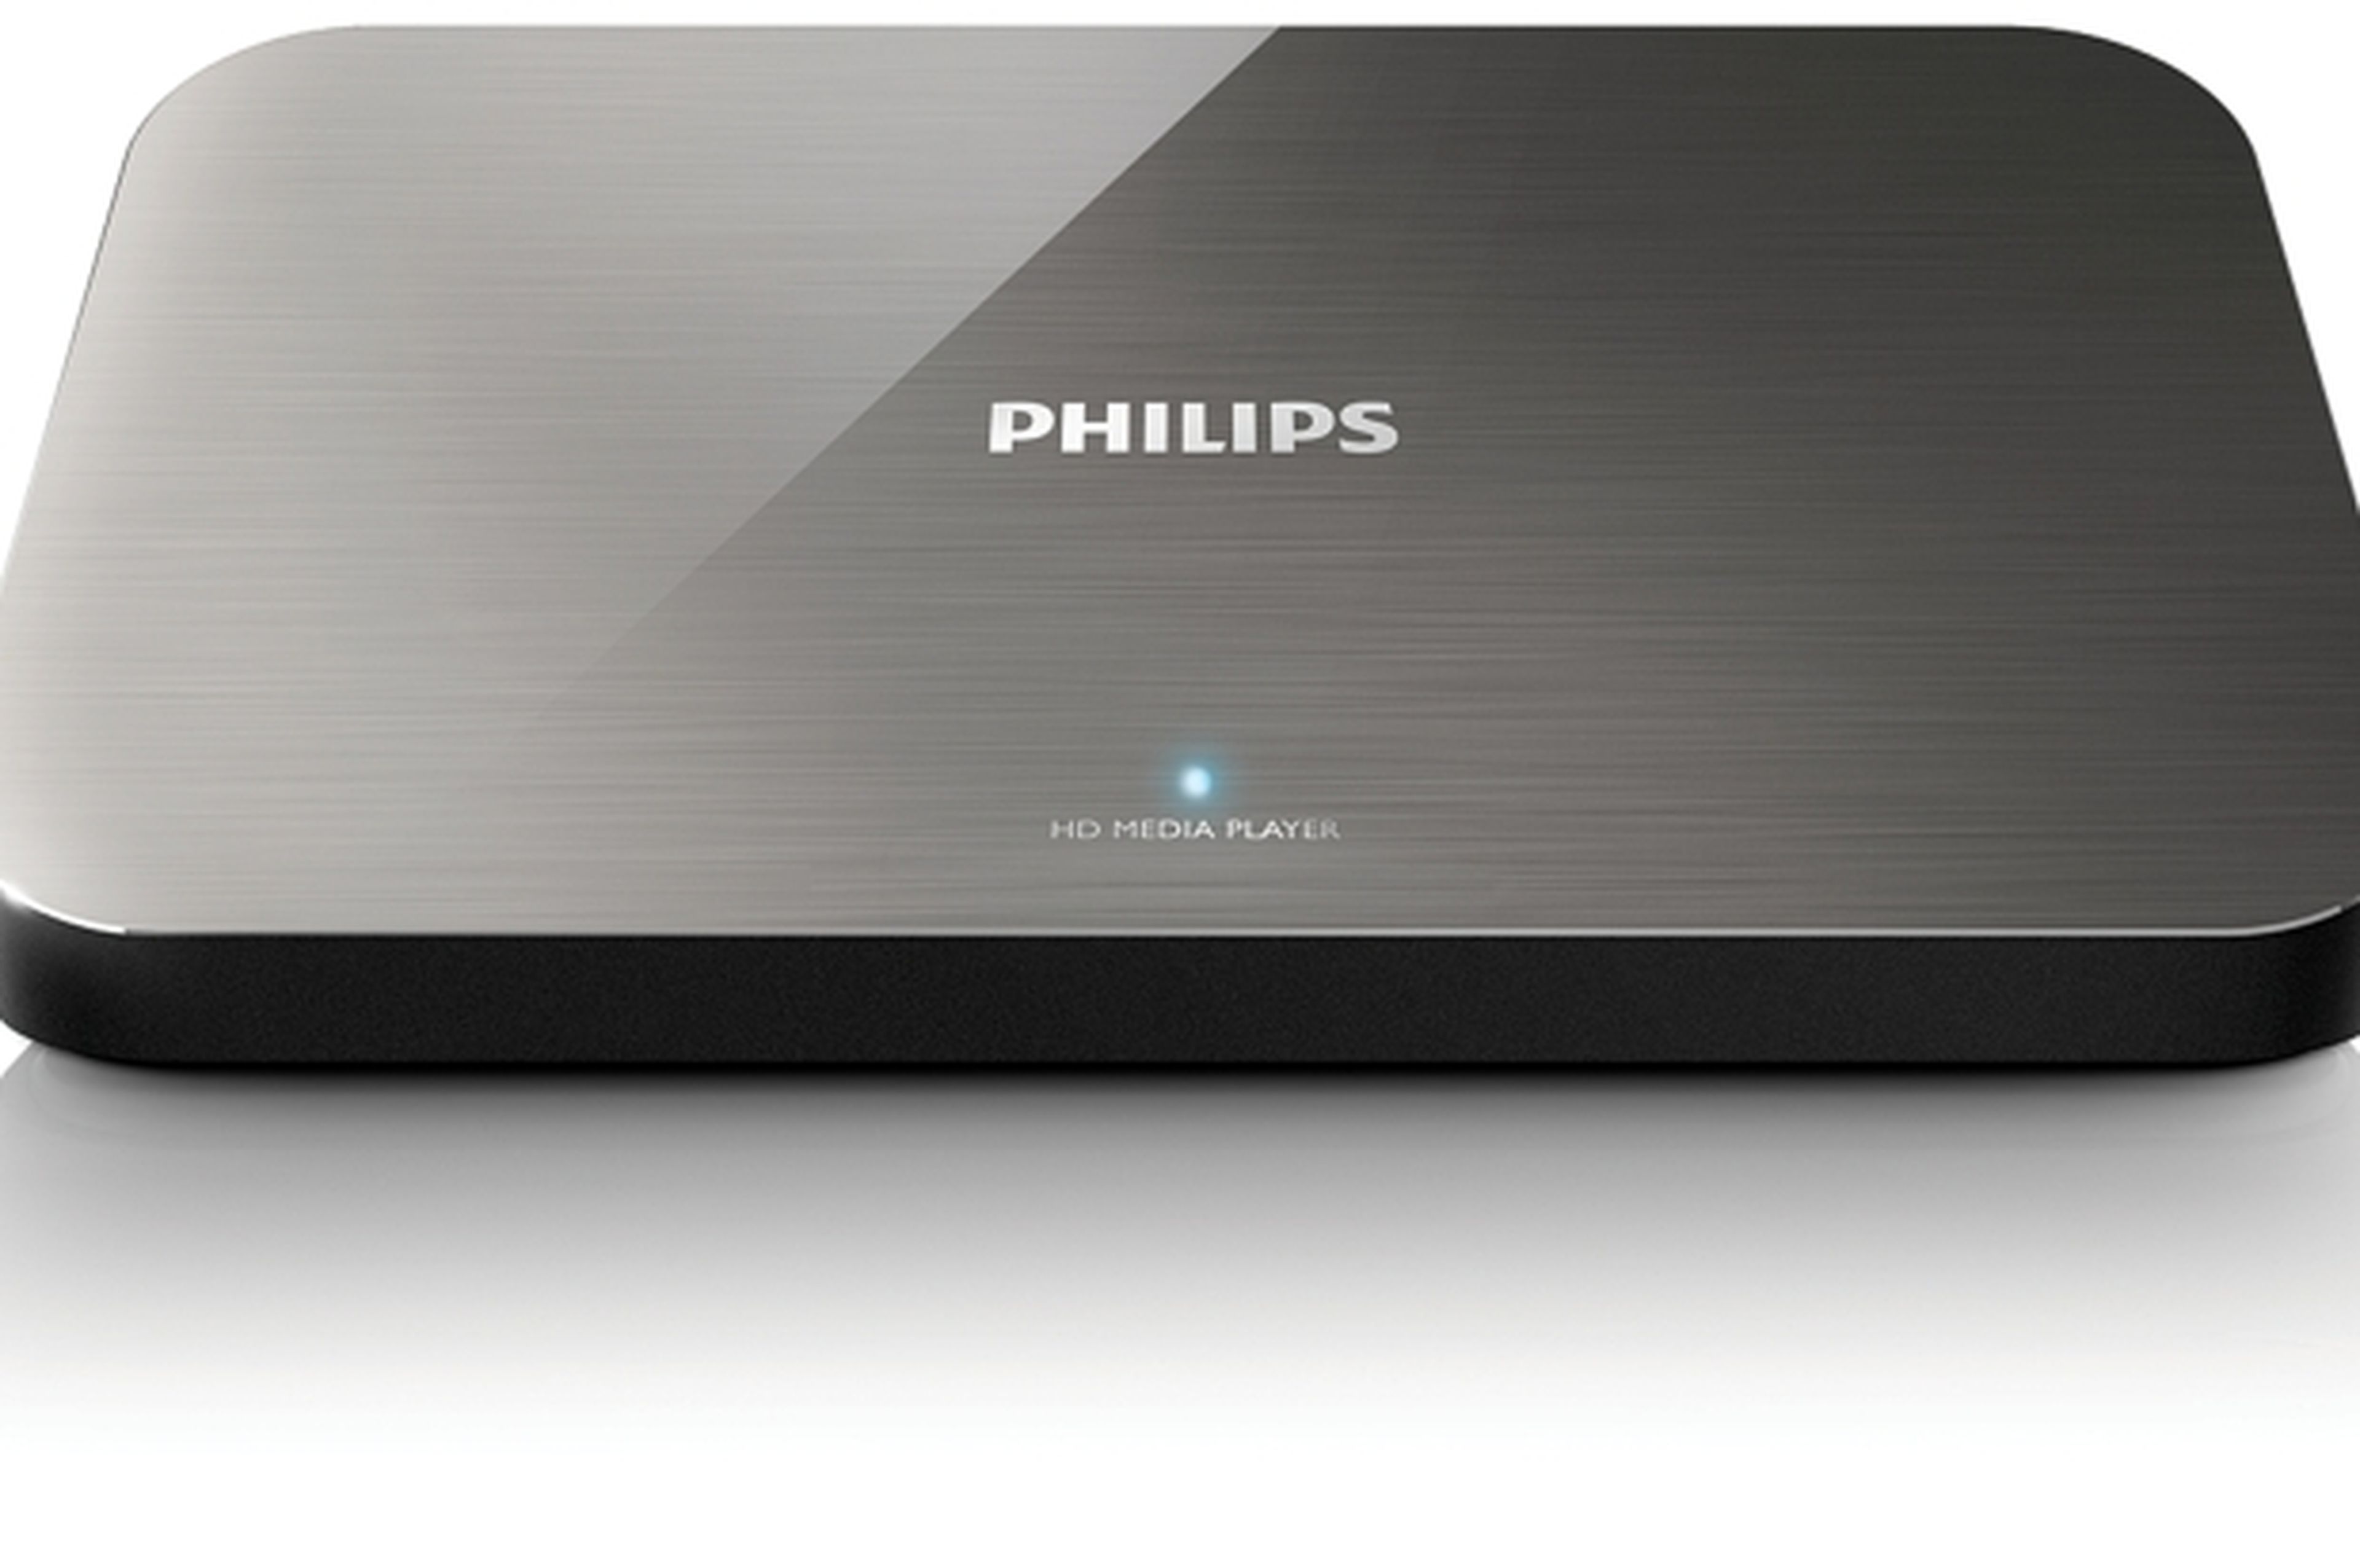 Philips Home Media Player